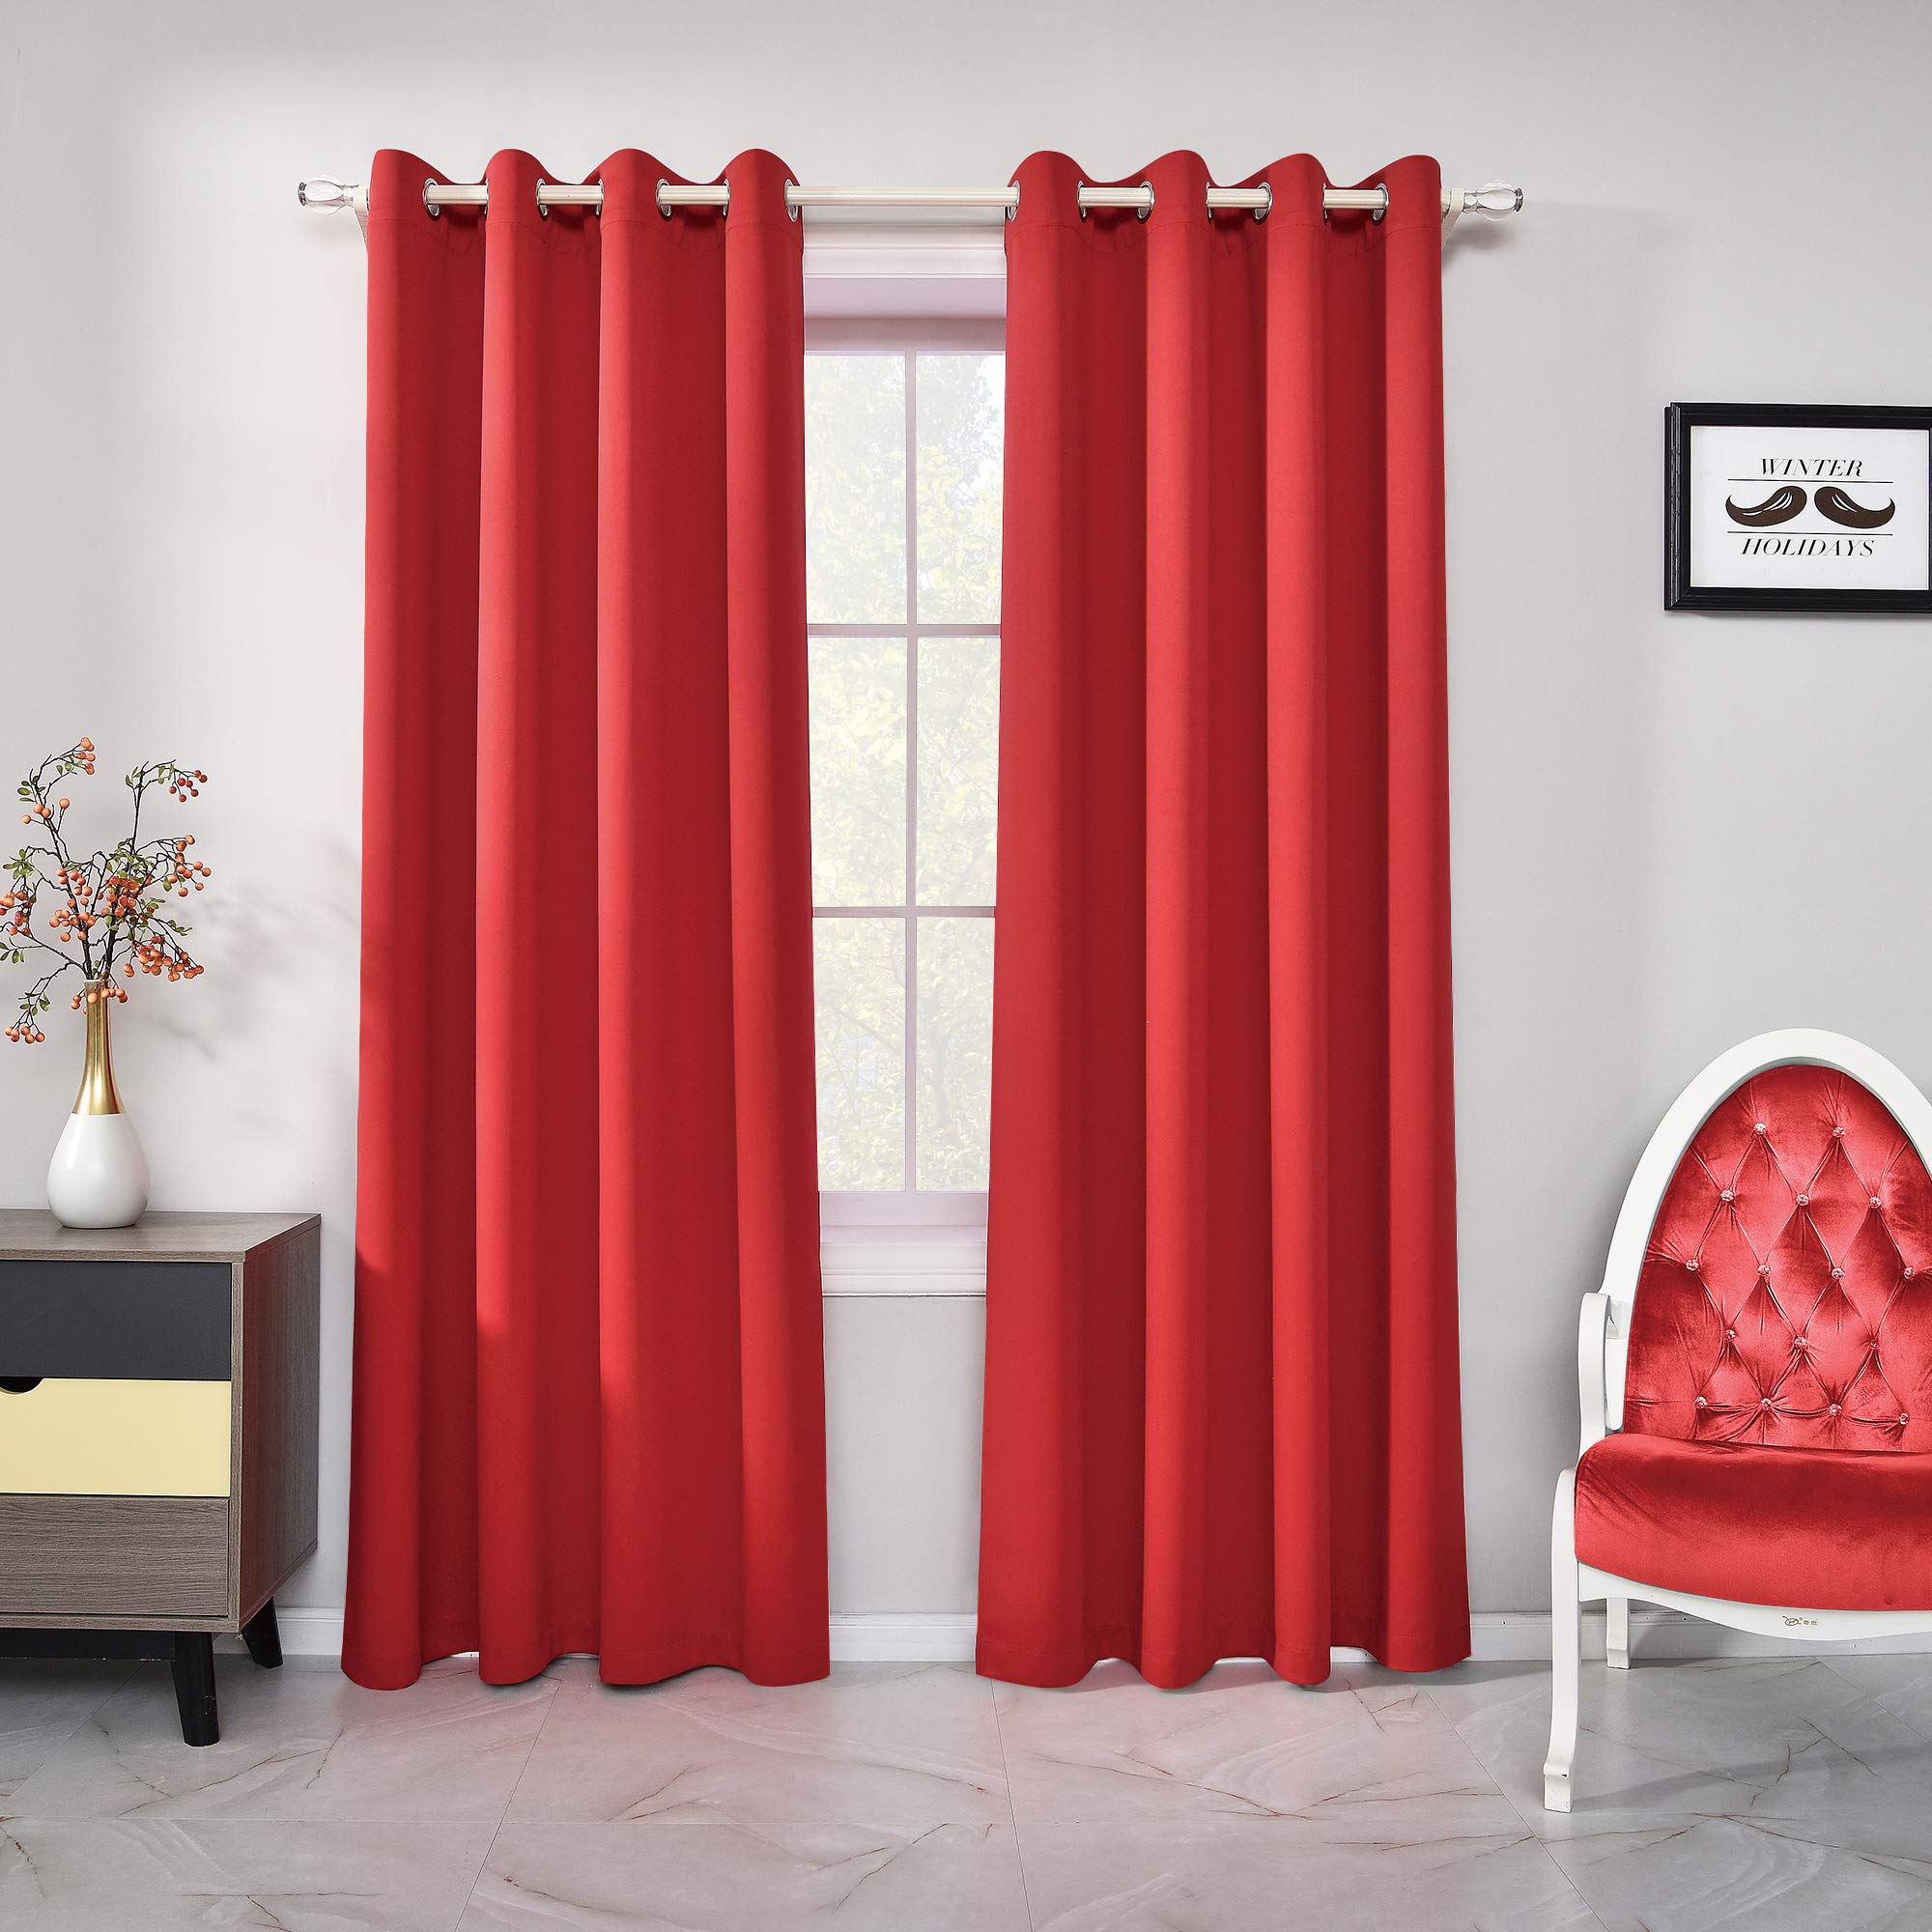 Rain City Christmas Red Curtains 84 Inch Length Light Blocking Thermal Insulated Windows Drapes Darkening Room Curtains for Living Room To